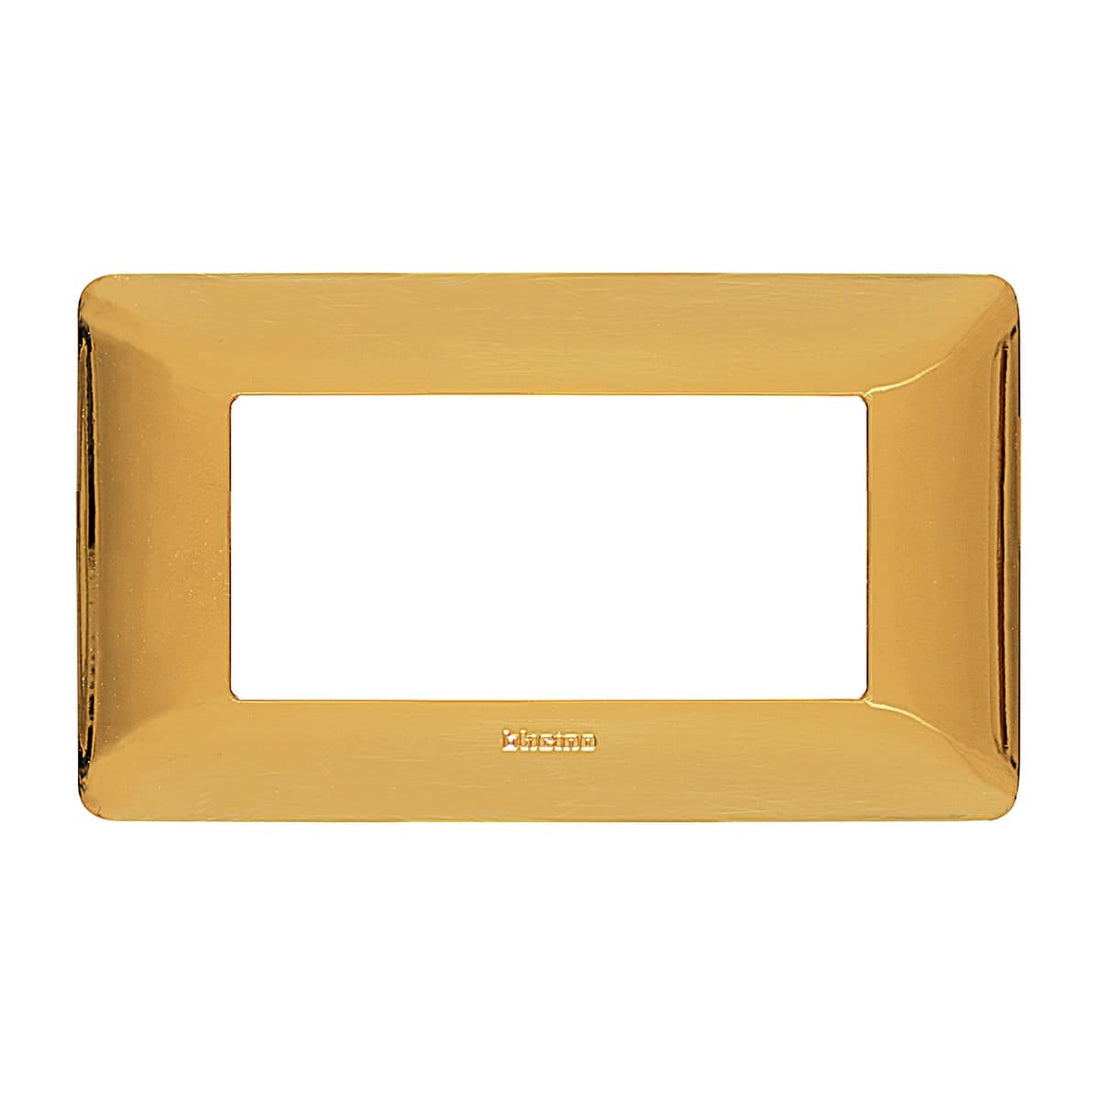 MATIX PLATE 4 PLACES POLISHED GOLD - best price from Maltashopper.com BR420100825